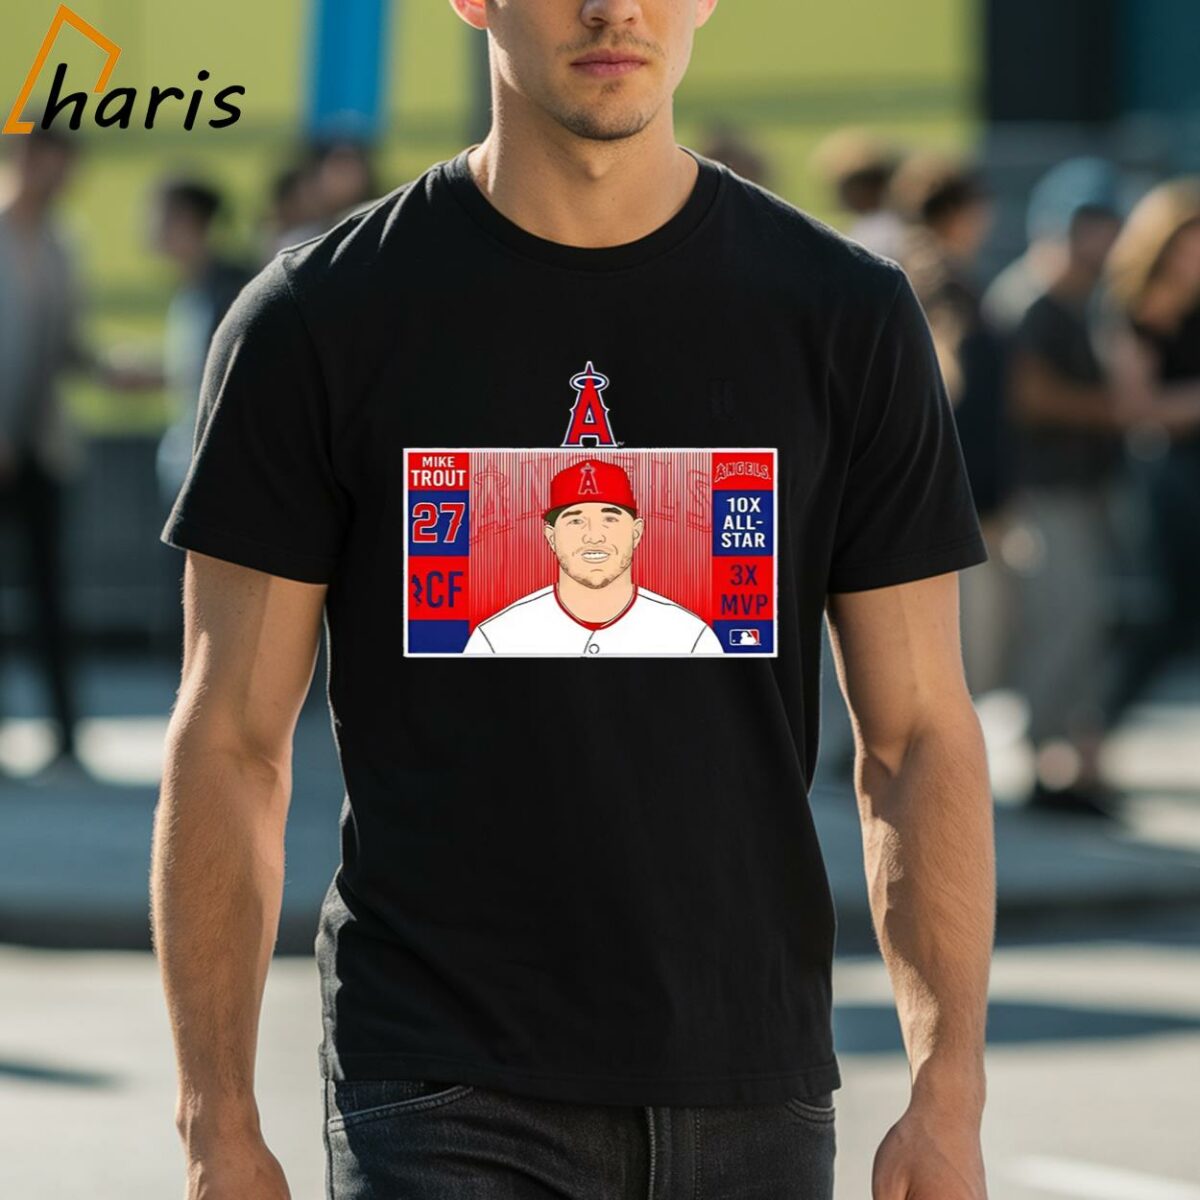 Los Angeles Angels 27 Mike Trout 10x all star 3x MVP shirt 1 shirt